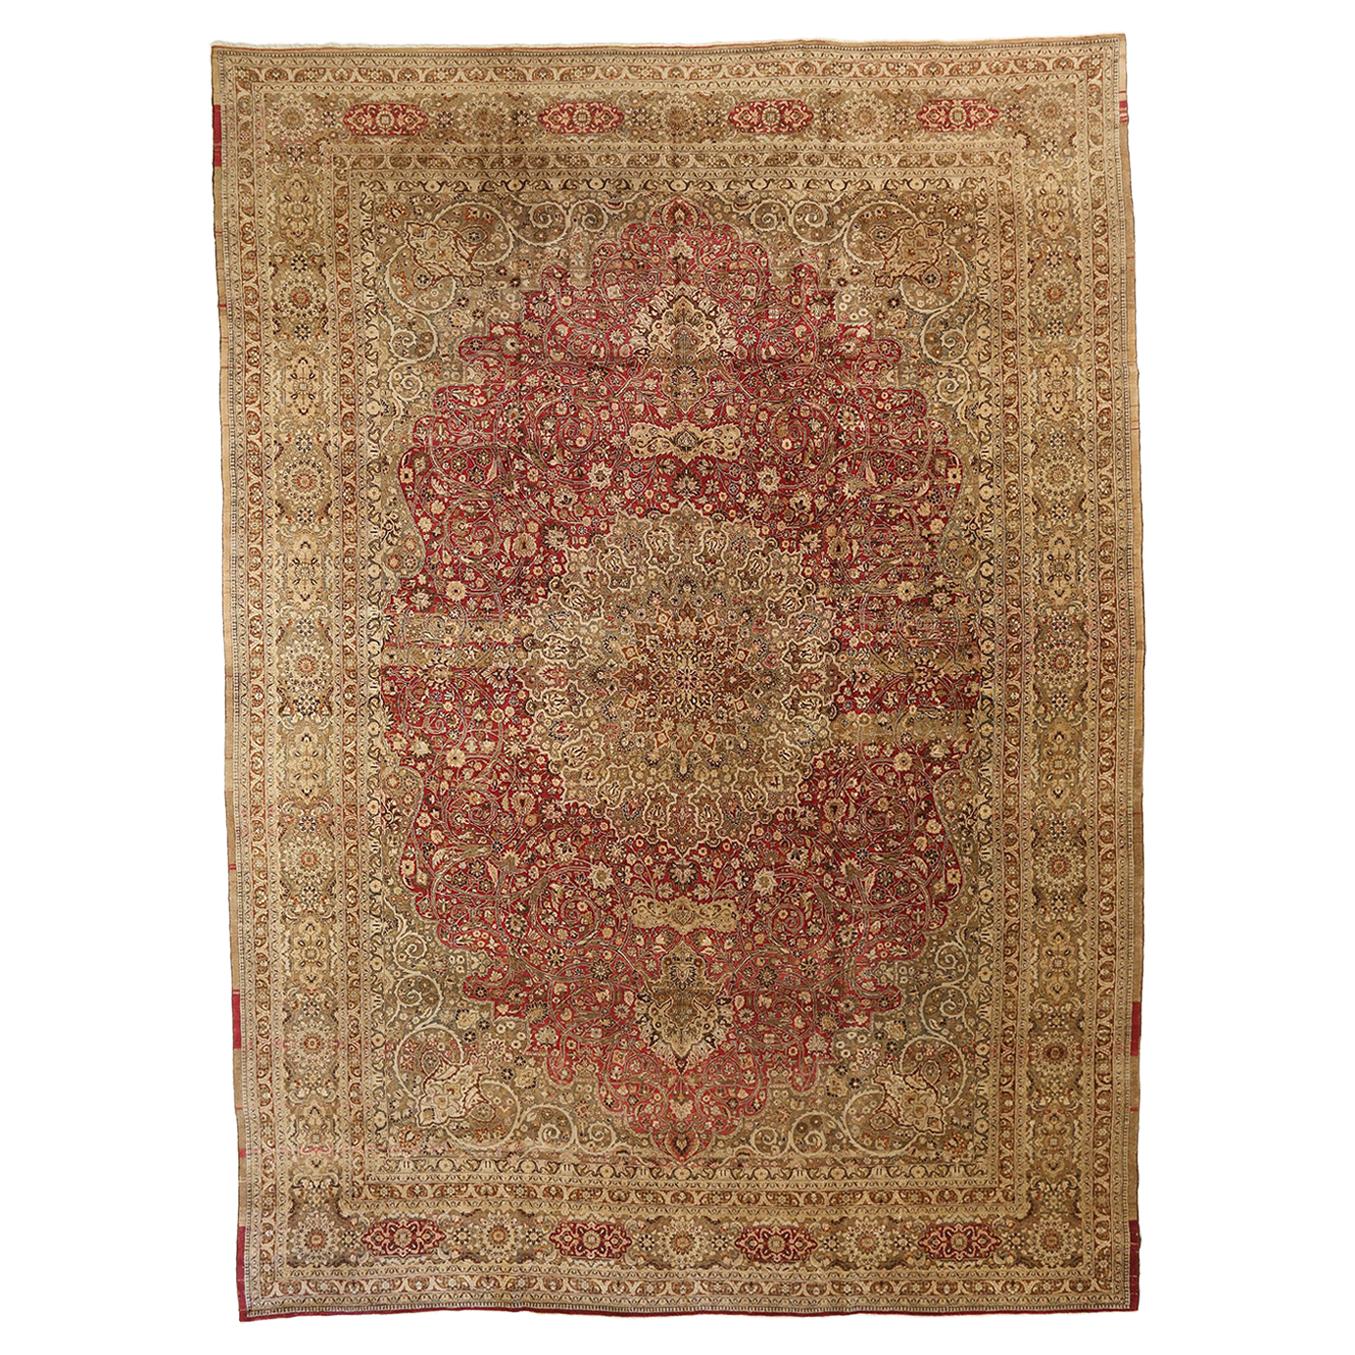 Large Antique Persian Mashad Rug with Beige and Brown Florals Over Red Field For Sale